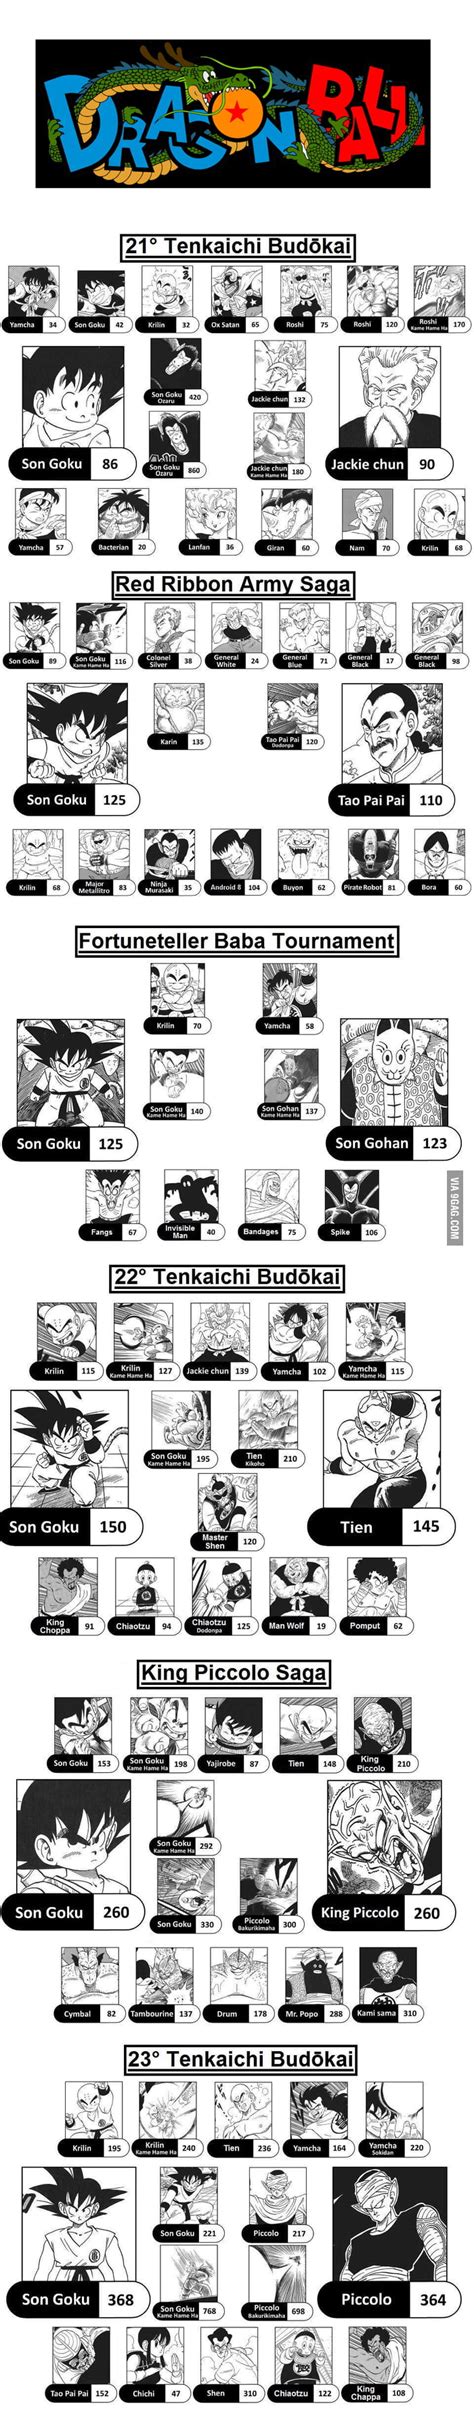 See also list of power levels scouter categories: DRAGON BALL - Characters power level (Part I) - 9GAG